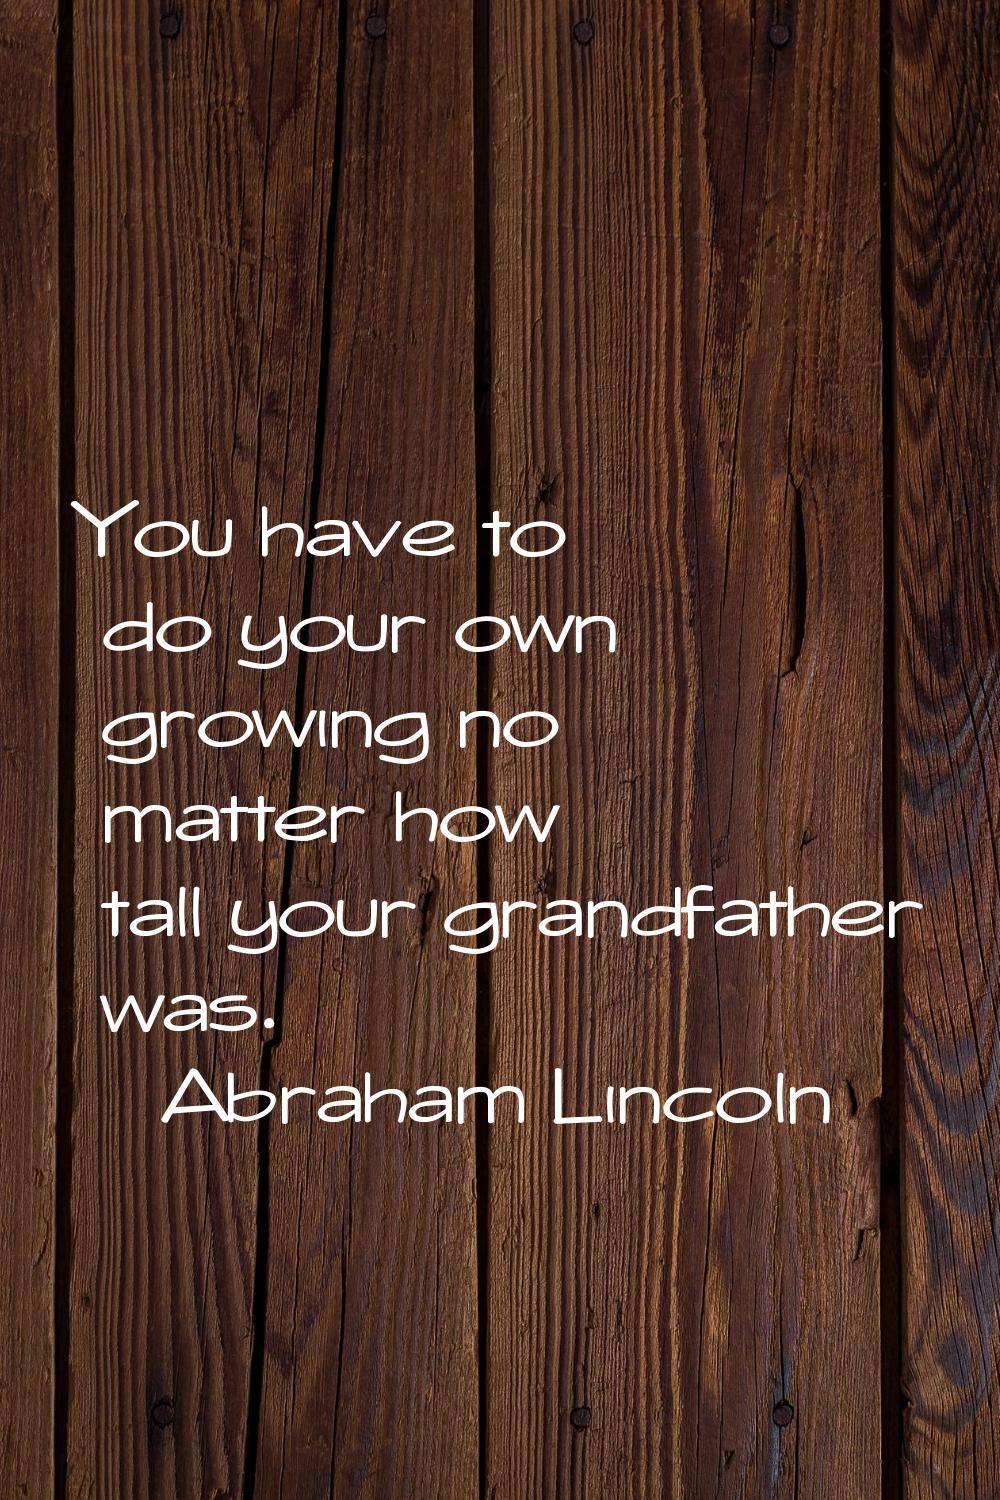 You have to do your own growing no matter how tall your grandfather was.